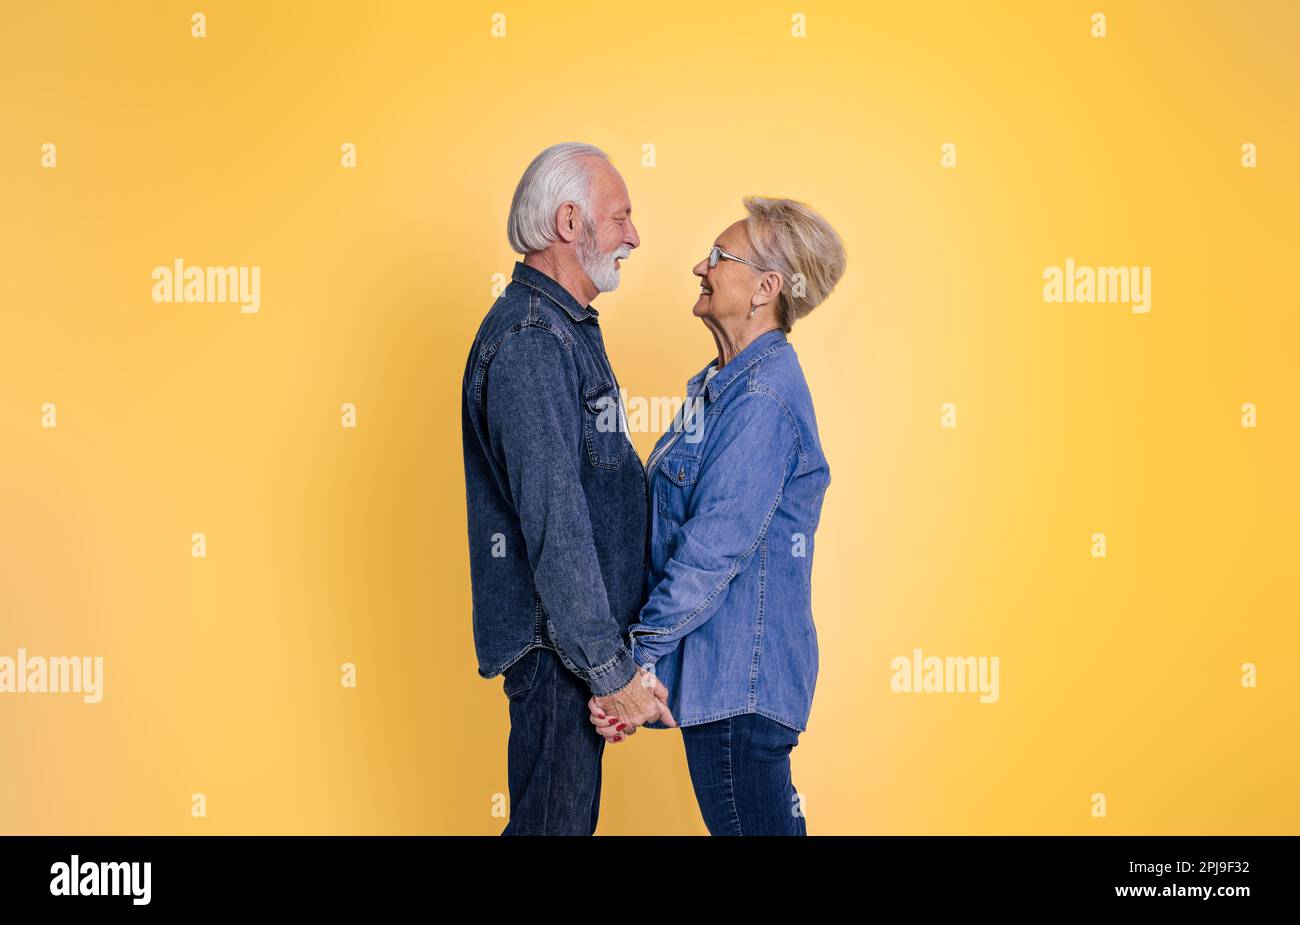 Side view of loving senior man and woman holding hands and romantically looking at each other while standing isolated on yellow background Stock Photo